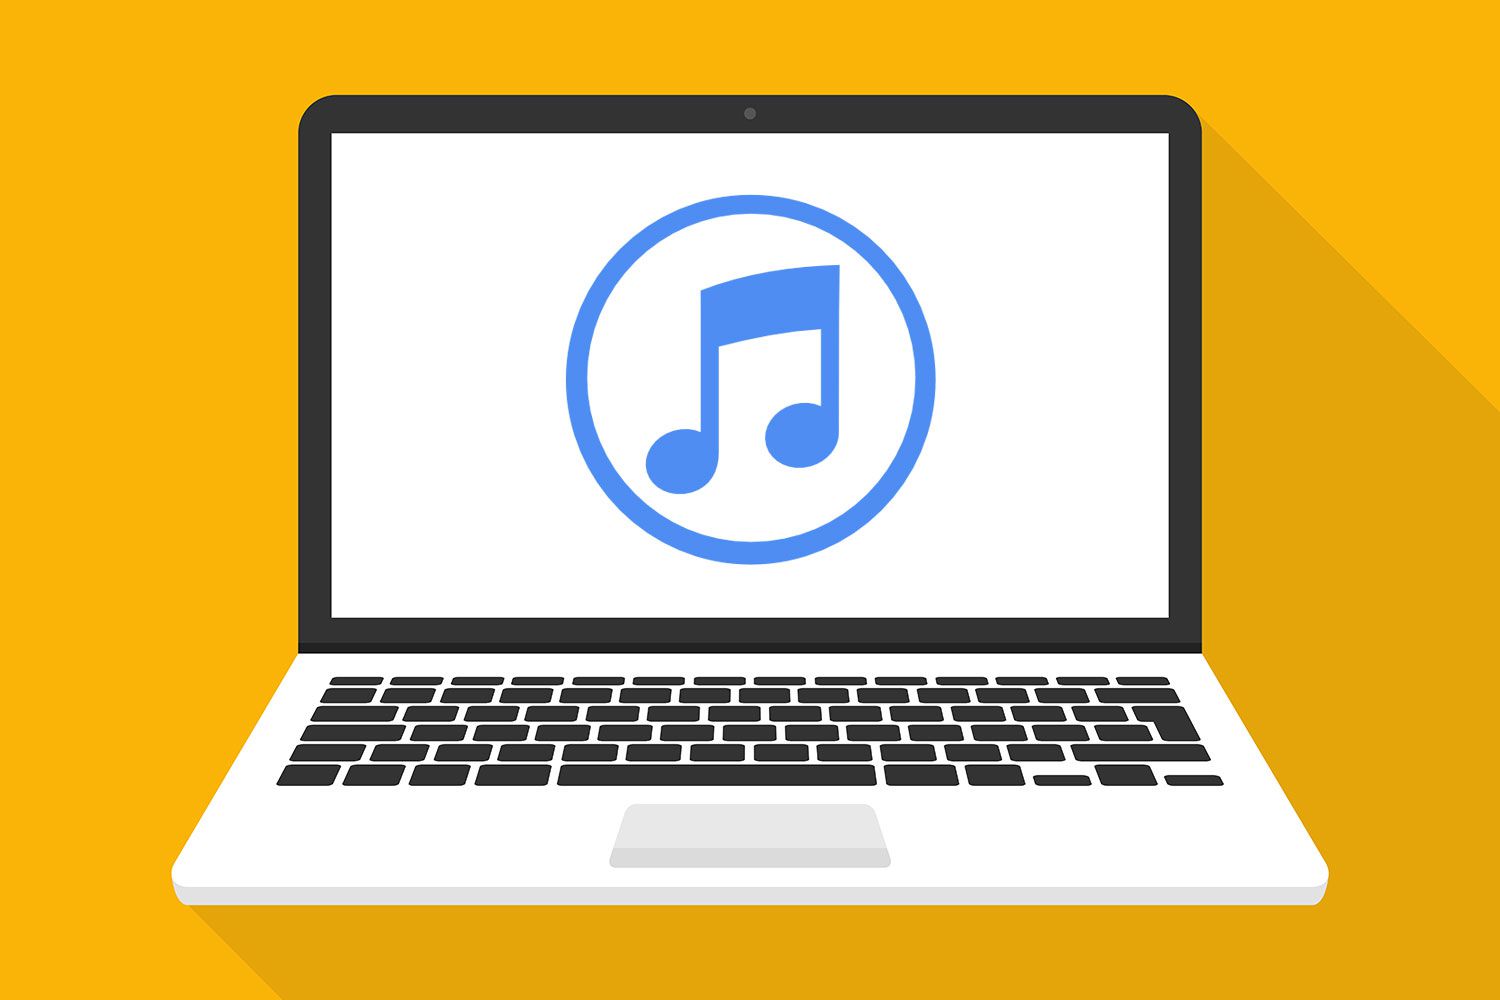 itunes download on chromebook